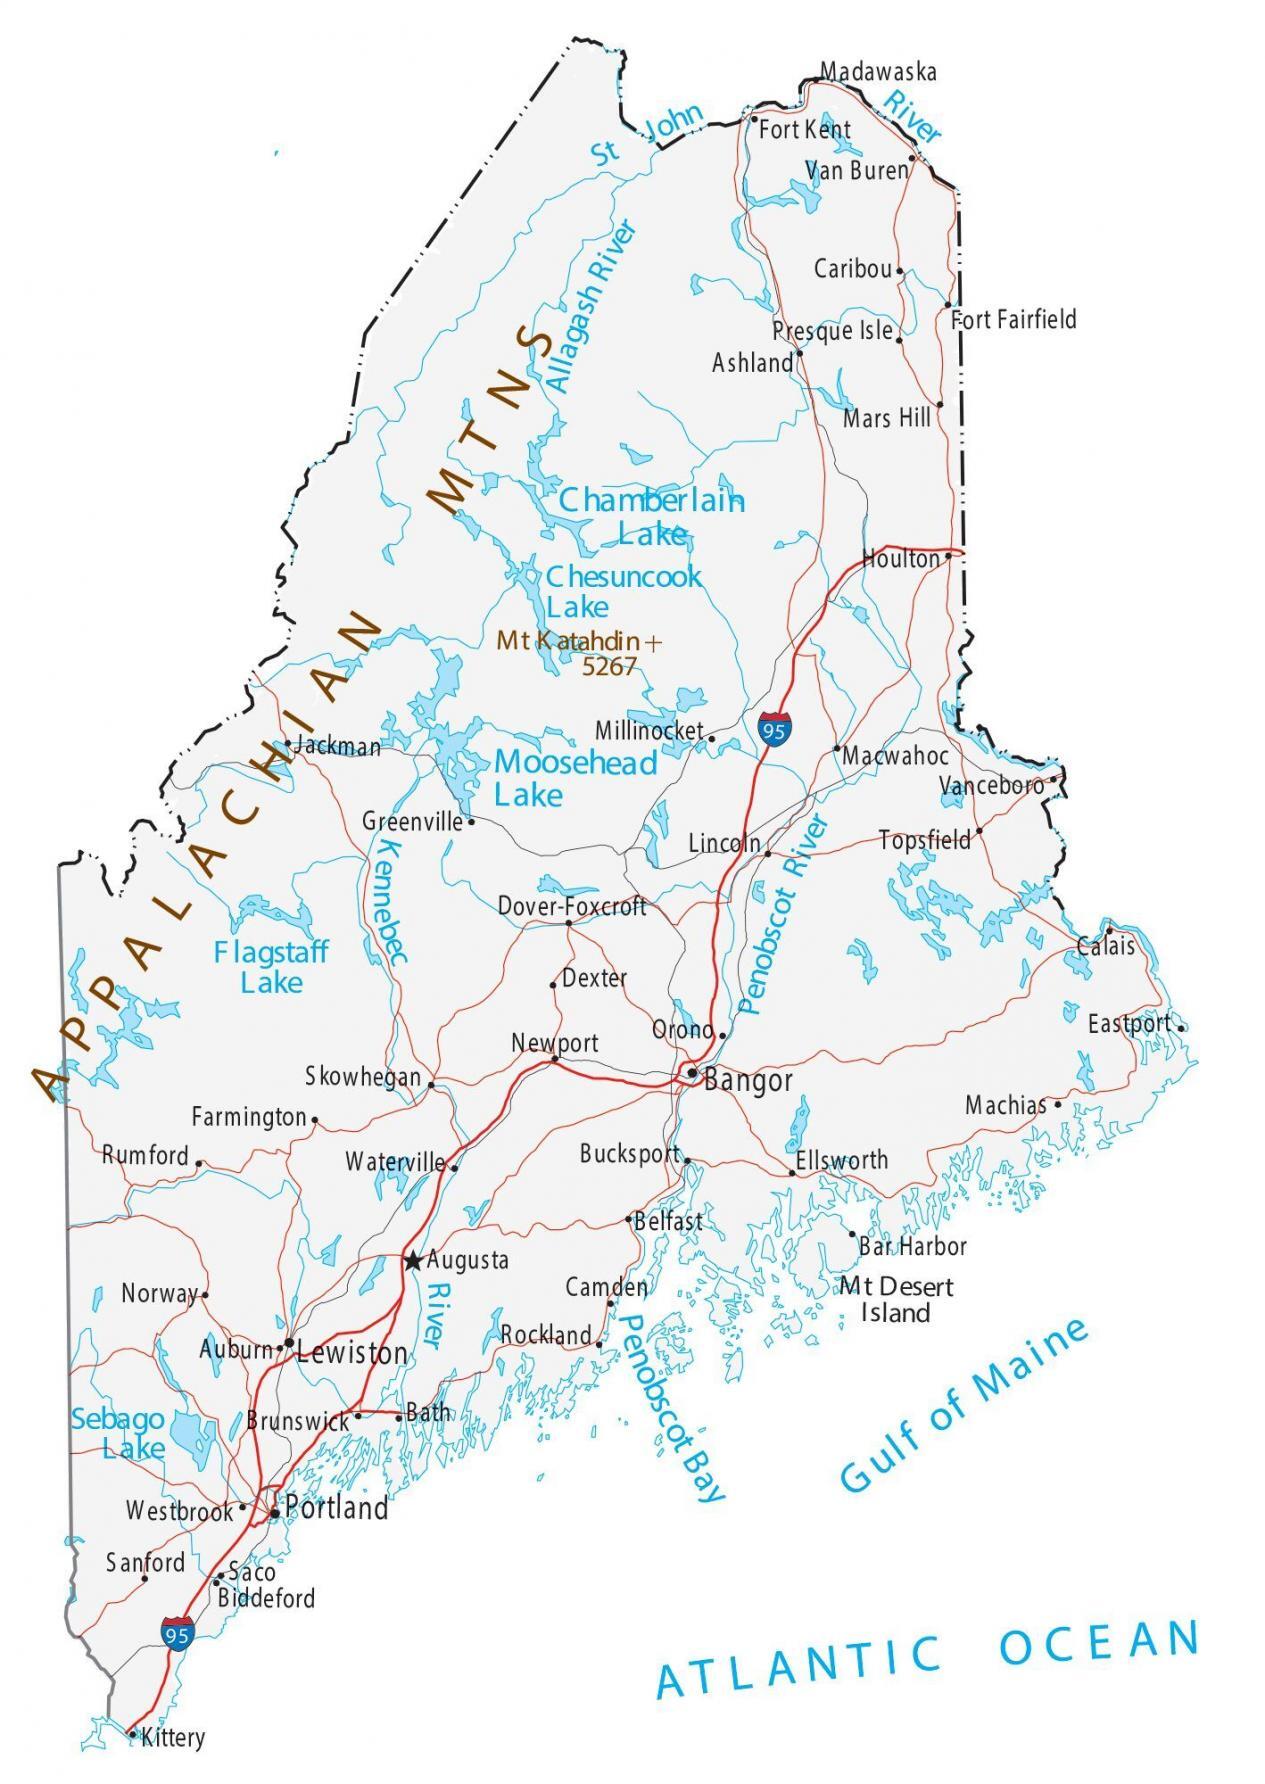 Map of Maine - Cities and Roads - GIS Geography